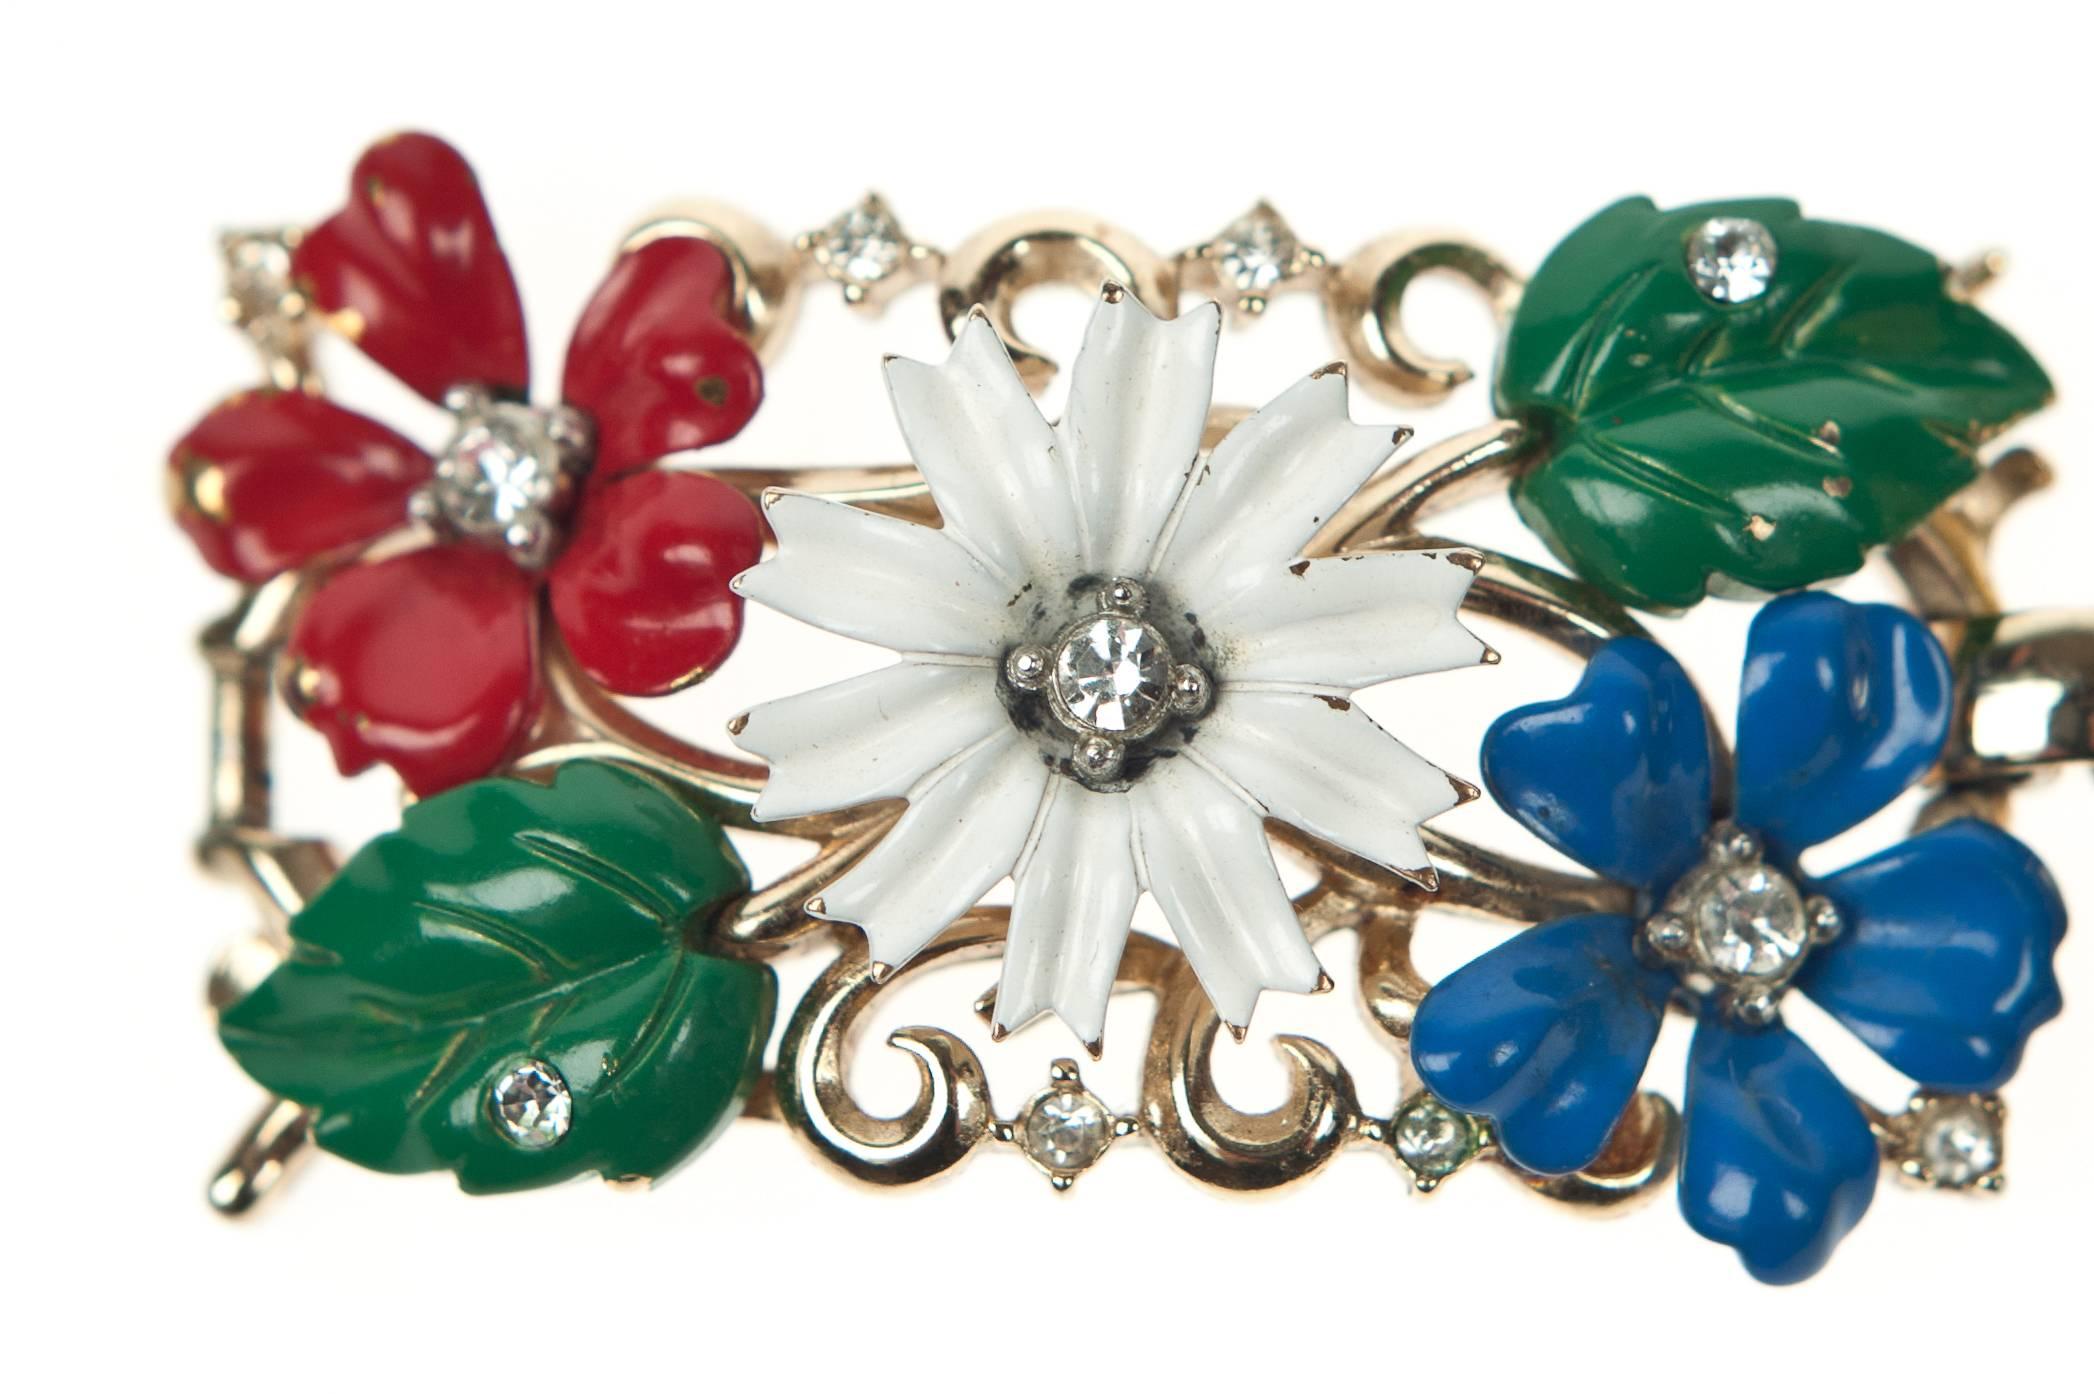 Beautiful bright primary coloured enamelled floral bracelet by Trifari, part of their “Field of Flowers” range c.1956.
The wide goldtone bracelet is composed for four articulated panels each embellished with indivdually hand enamelled flowers and